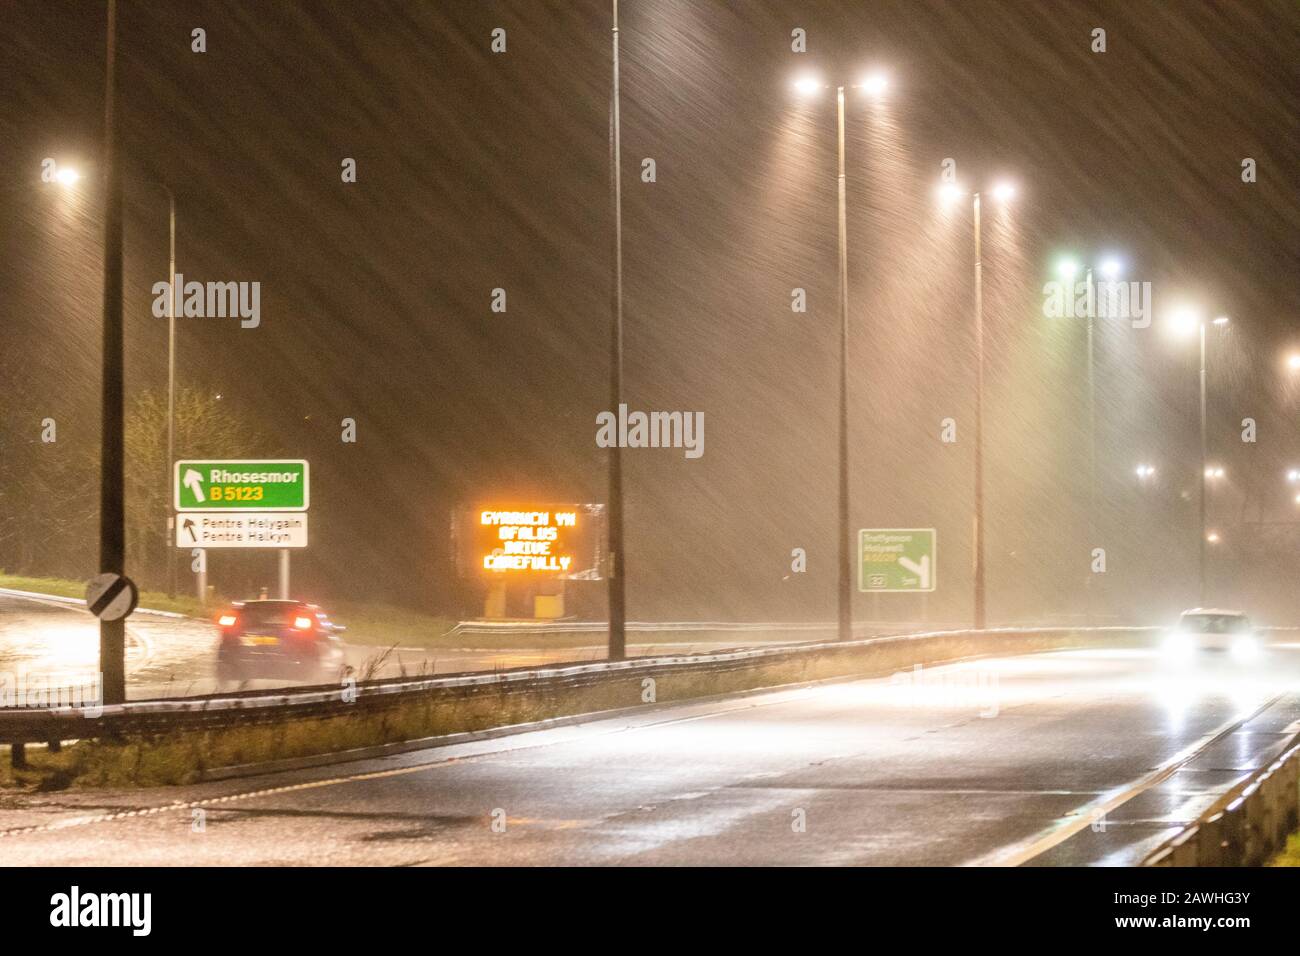 Flintshire, North Wales, UK. UK Weather: Sunday 9th February 2020, severe weather today with a Met Office Amber Warning for Storm Ciara now hitting North Wales with current conditions on the A55 passing through Halkyn  © DGDImages/AlamyNews Stock Photo